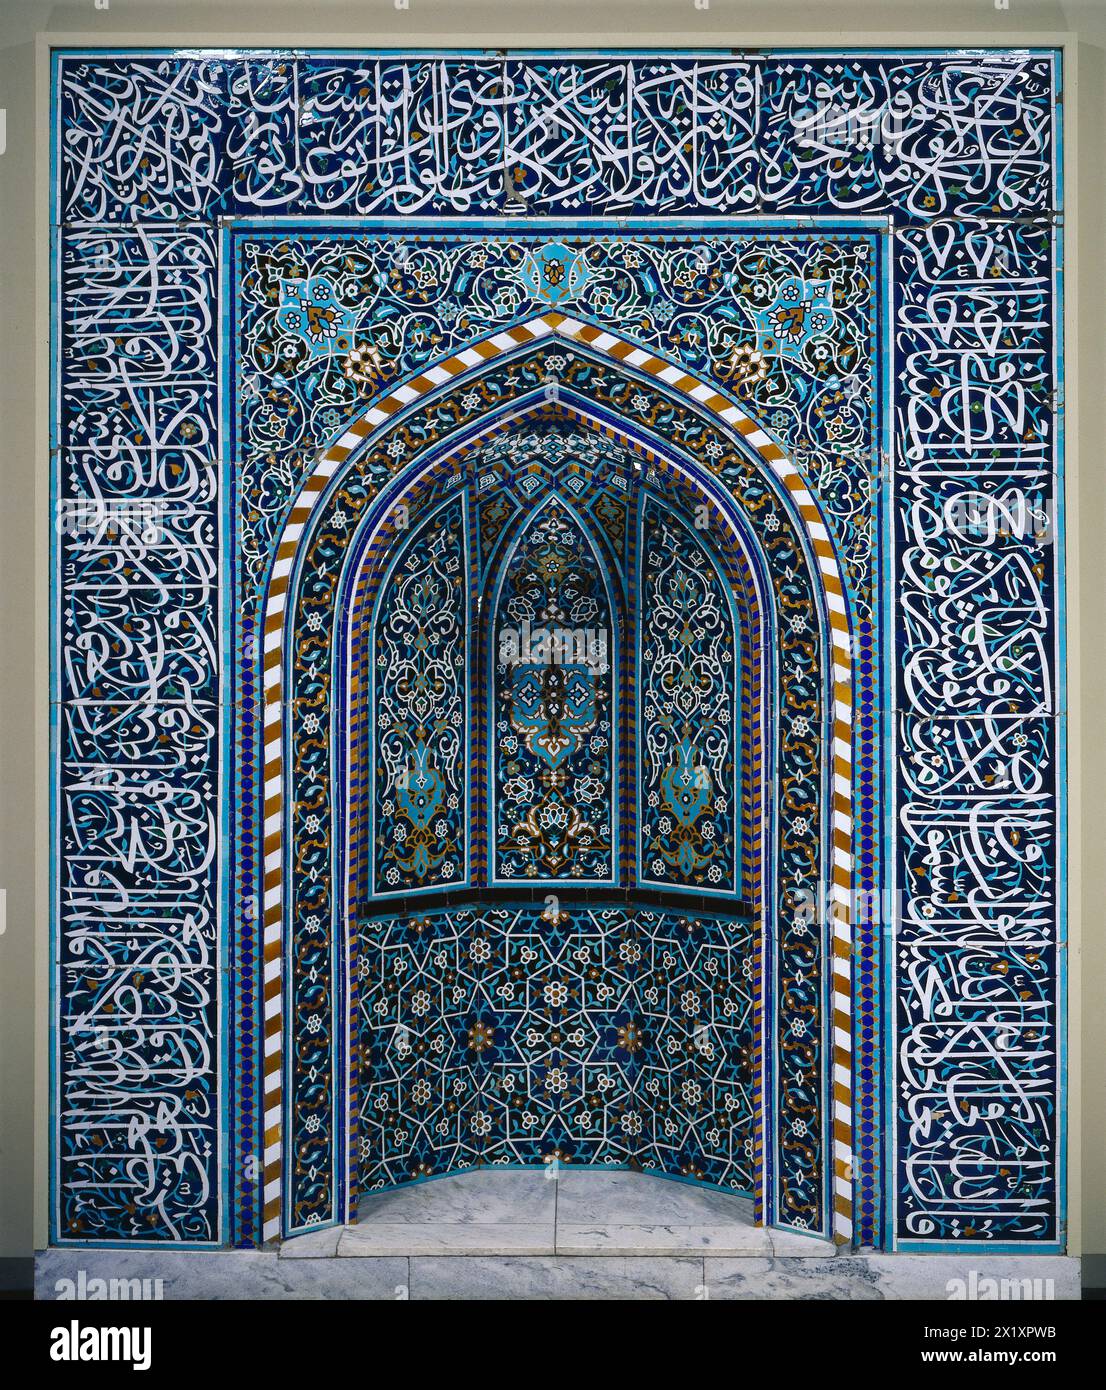 Prayer Niche (Mihrab) from Isfahan, Iran.  In the style of the Safavid period.  Ceramic mosaic.   Now held by the Cleveland Museum of Art. Stock Photo